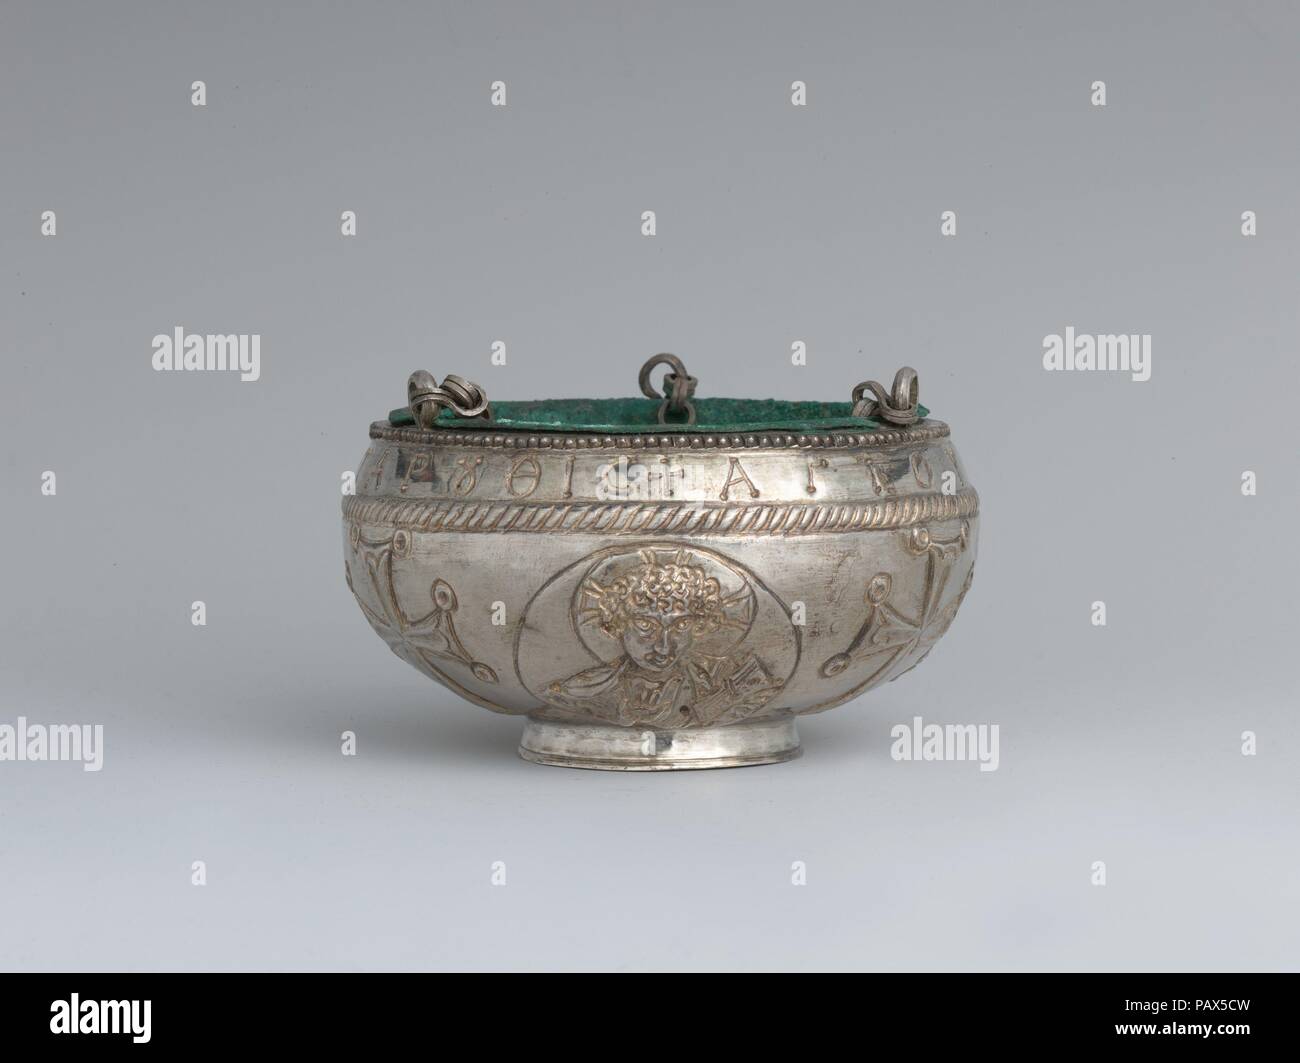 The Attarouthi Treasure - Censer. Culture: Byzantine. Dimensions: Overall (without chain): 3 1/4 x 5 3/16 in. (8.2 x 13.2 cm)  Overall (hanging with chain): 15 1/16 x 5 3/16 in. (38.2 x 13.2 cm)  Diam. of foot: 2 5/16 in. (5.9 cm). Date: 500-650.  With a youthful Christ with a cruciform halo, two archangels, and crosses  Inscribed in Greek: Of Saint John of the village of Attaroutha  In early images of Christ he is always shown as a youth with short, curly hair. His halo is cruciform with three arms to represent the cross upon which he died. The flanking medallions containing archangels, the g Stock Photo